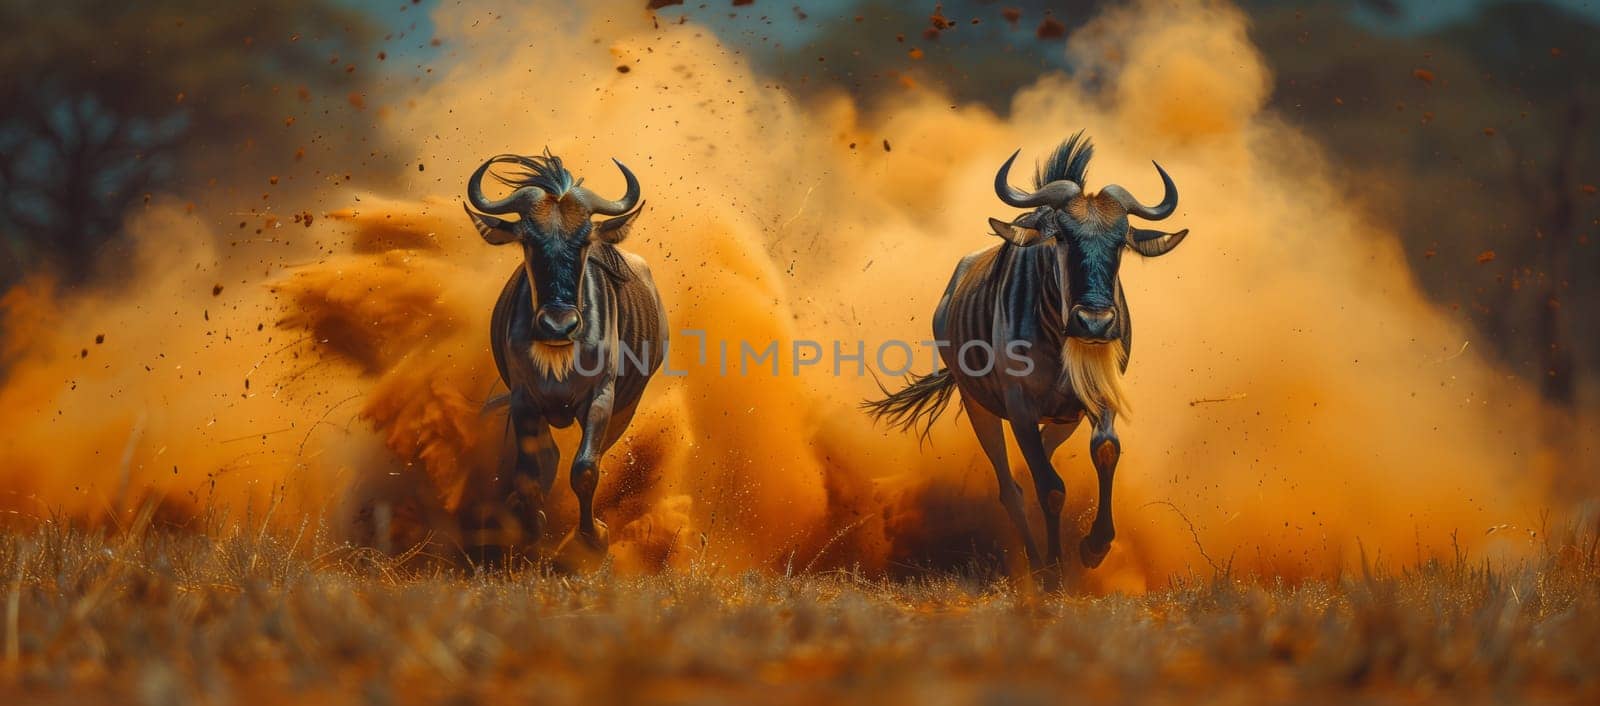 Two wildebeest gallop across a dusty grassland, their majestic figures creating a picturesque scene reminiscent of a painting in motion